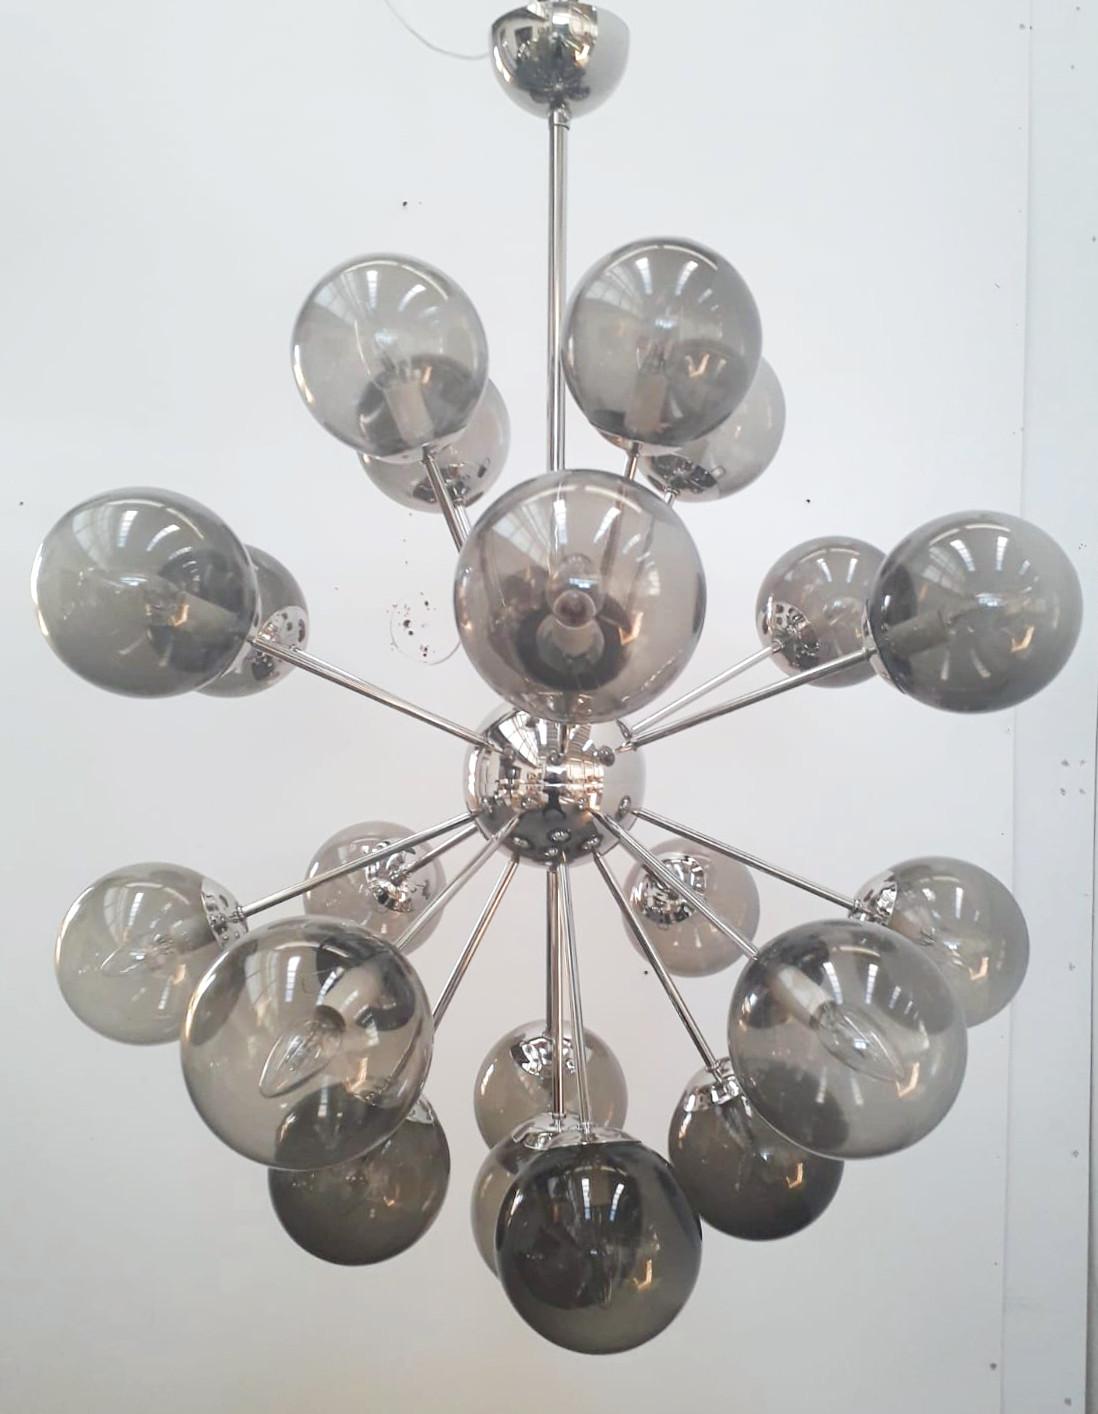 Italian sputnik chandelier with 21 Murano glass globes mounted on metal frame in polished nickel finish / Designed by Fabio Bergomi for Fabio Ltd / Made in Italy
21 lights / E12 or E14 type / max 40W each
Diameter: 36 inches / Height: 43 inches